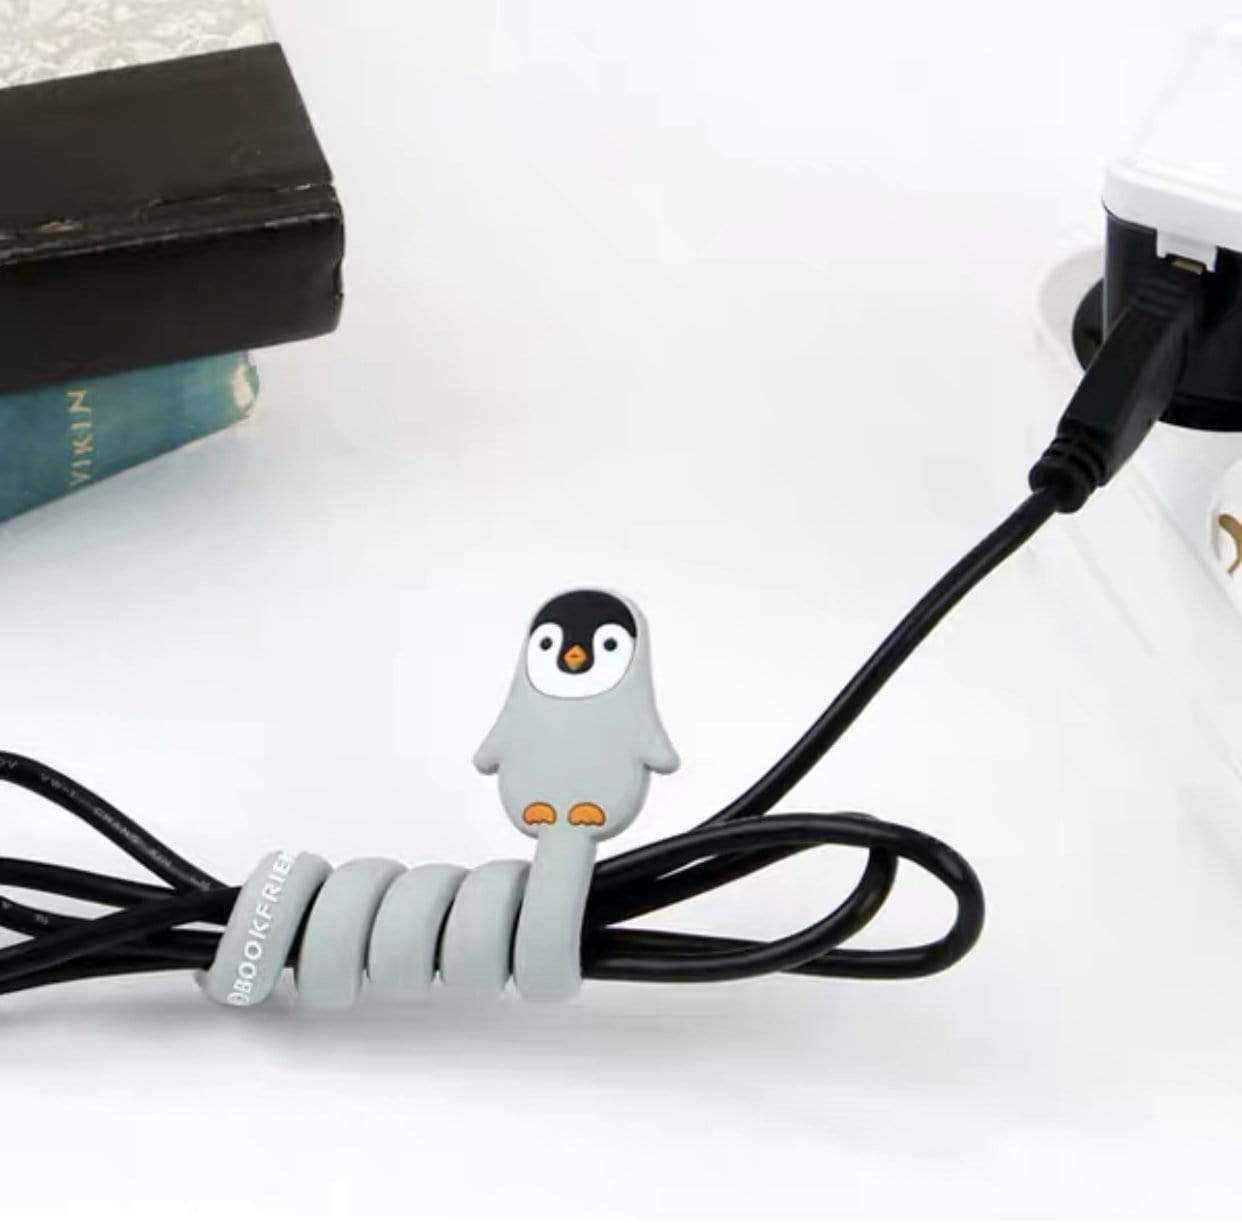 Helms Store Accessories Bookfriends Korea Animal Character Cable Organiser - Penguin